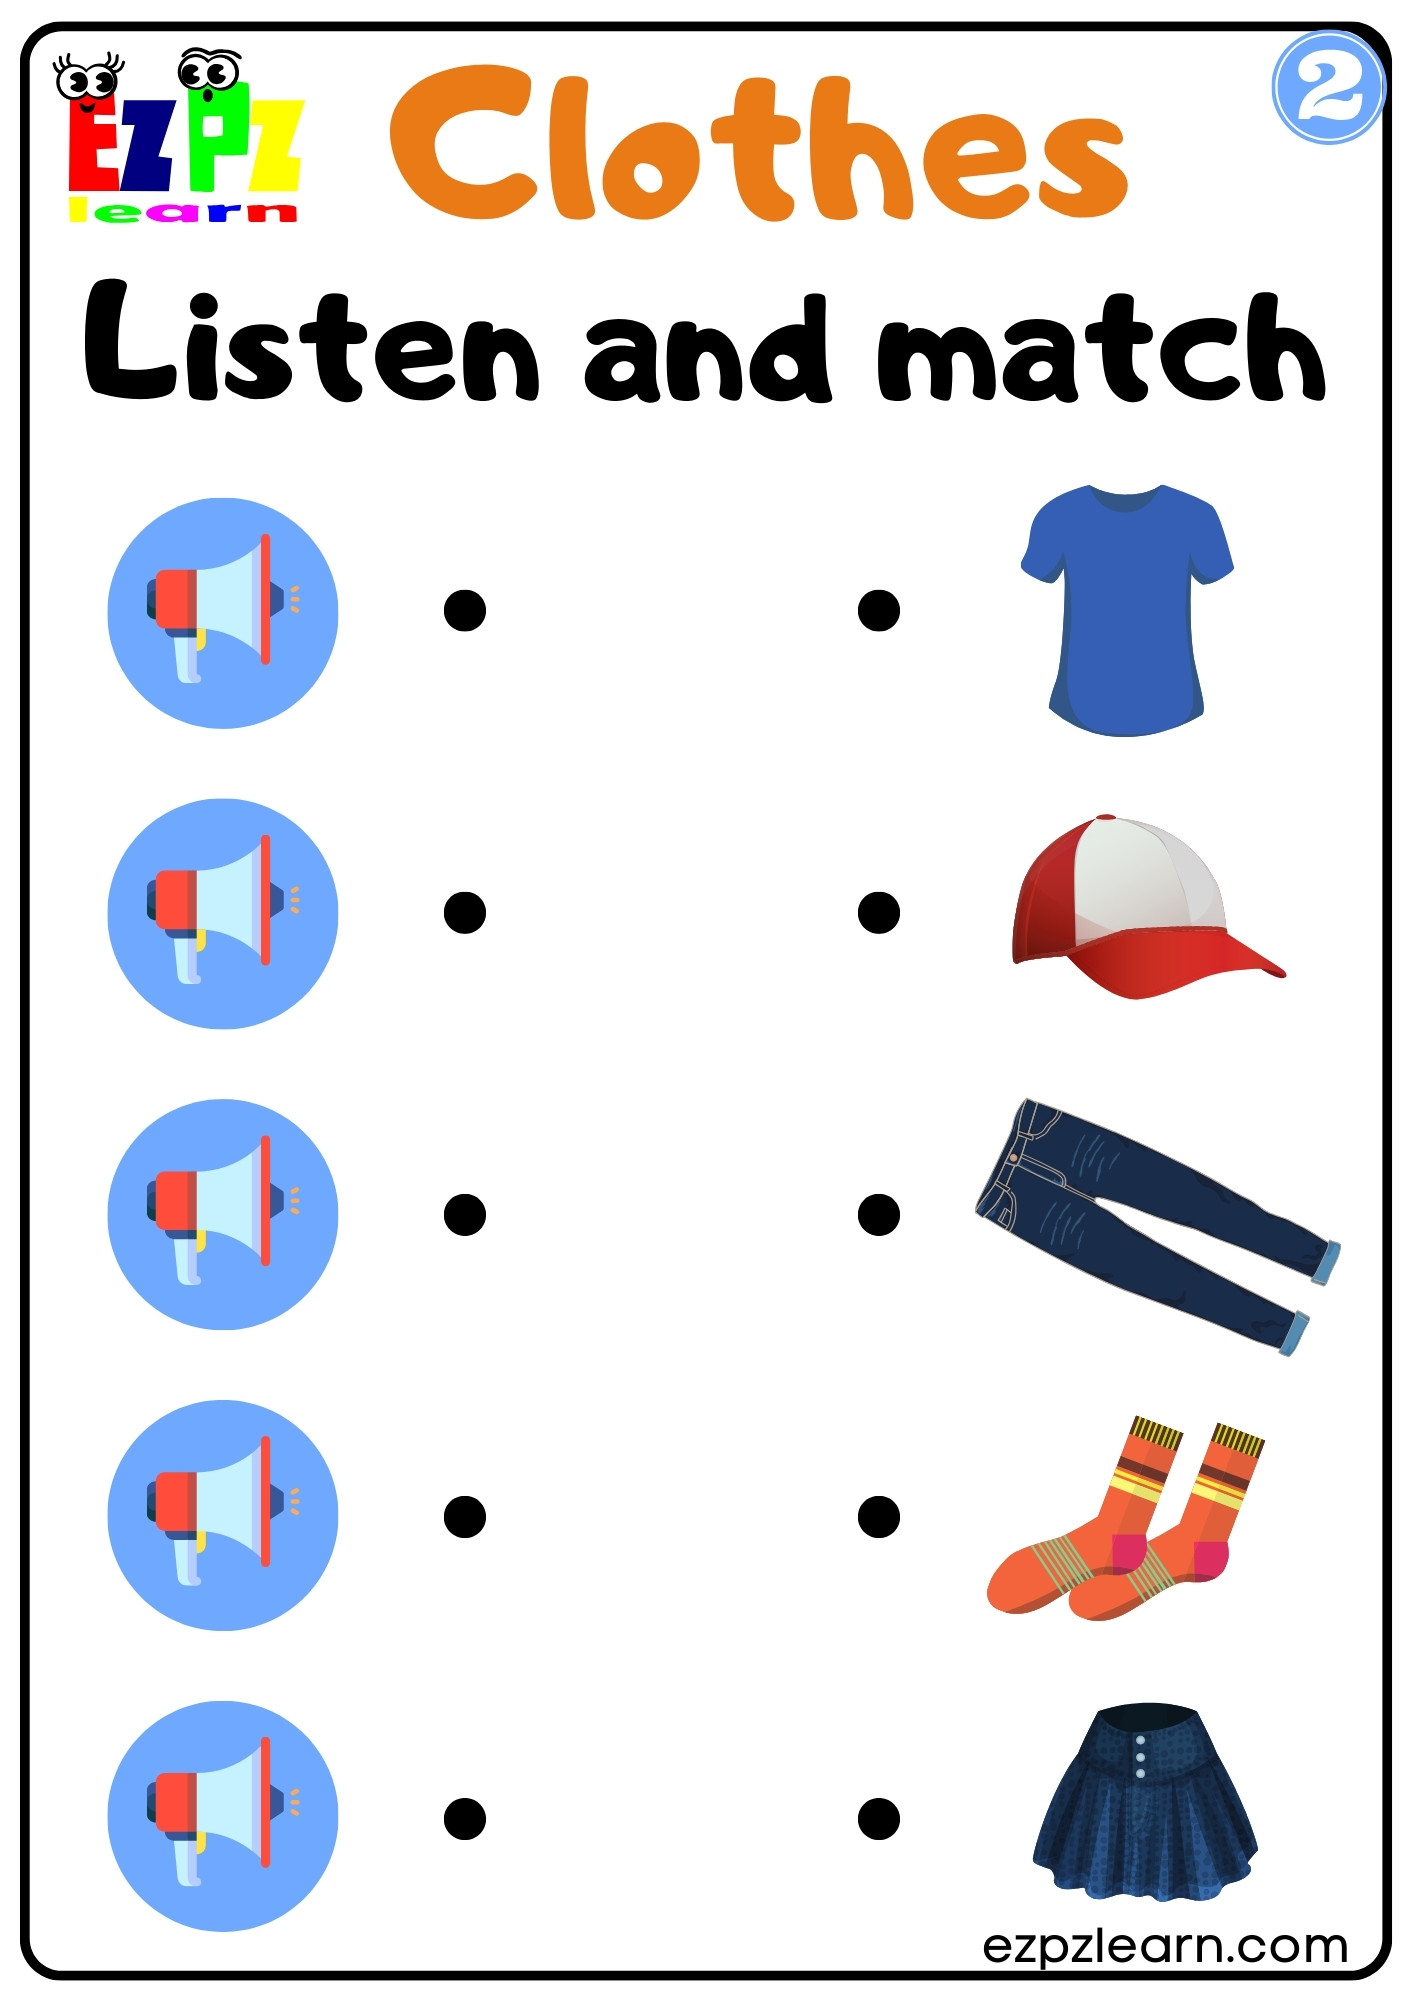 Interactive Clothes Worksheet Listen and Match the Correct Images ...